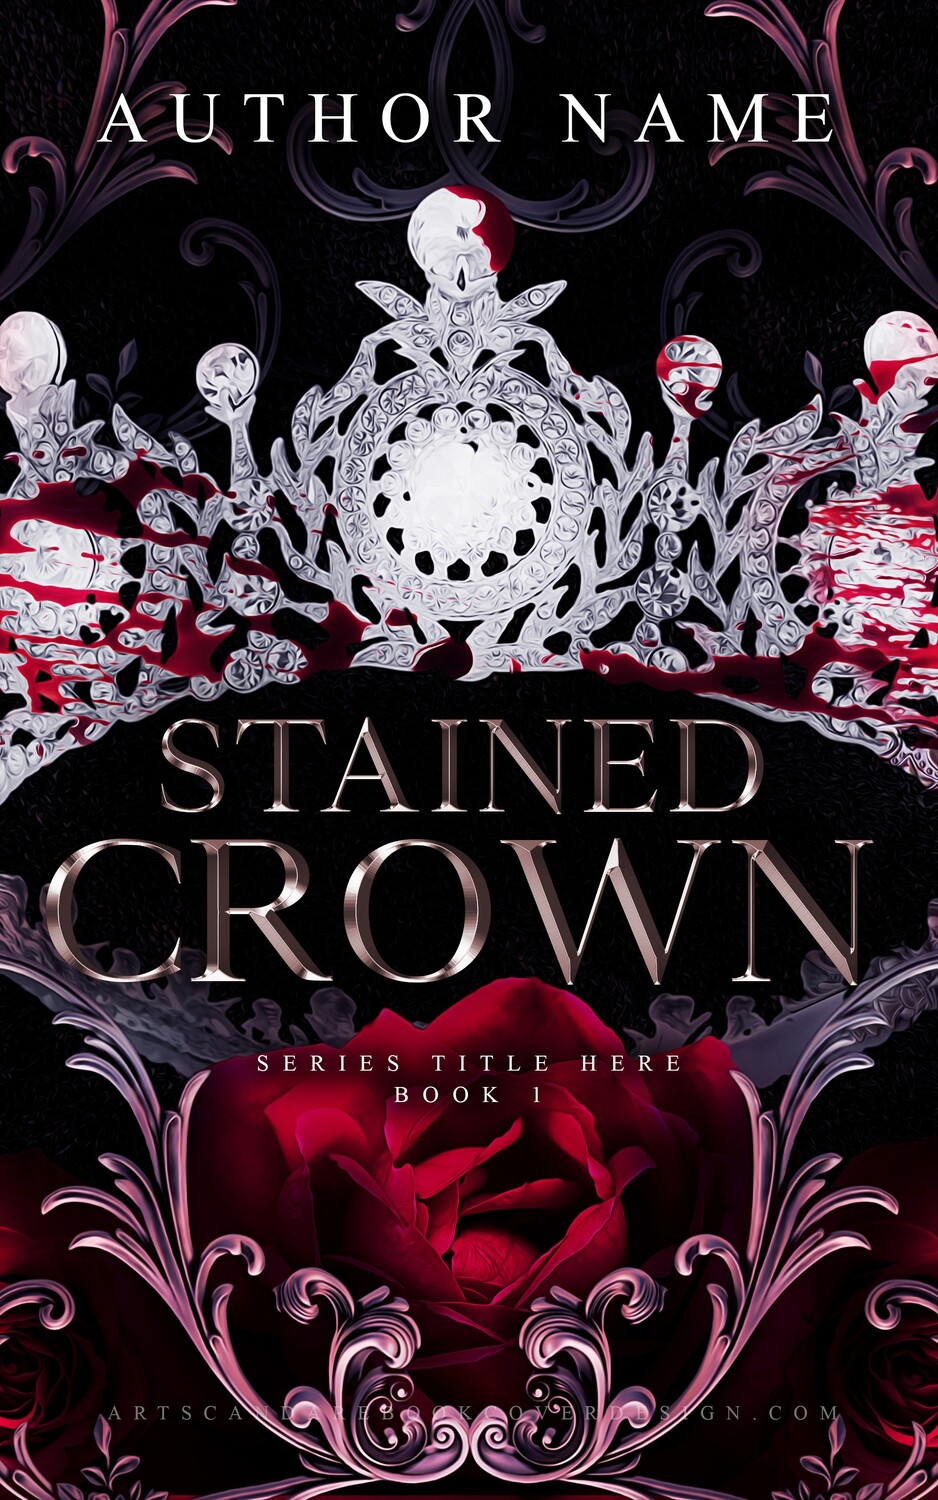 STAINED CROWN